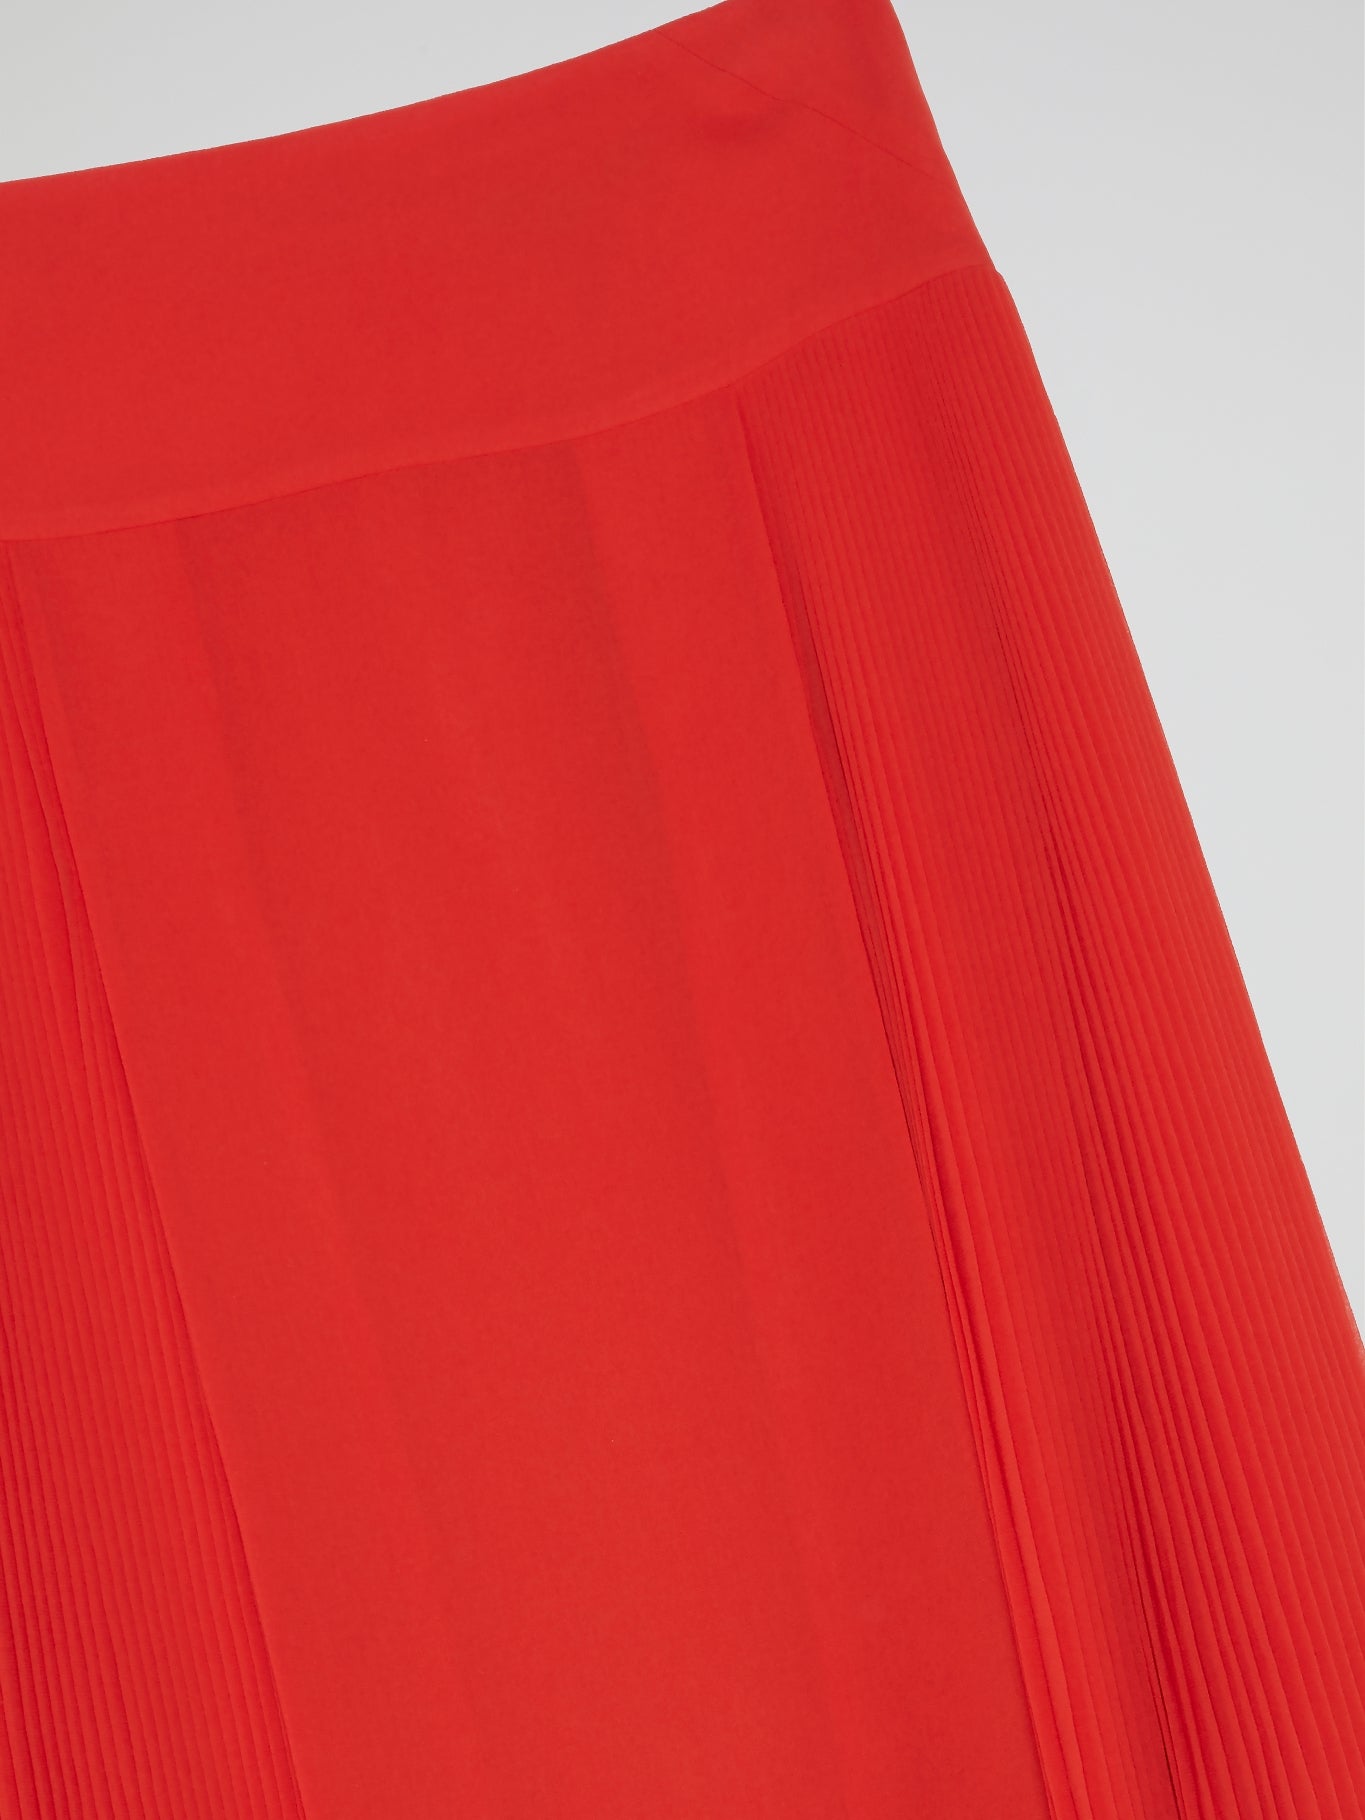 Red Accordion Pleated Skirt